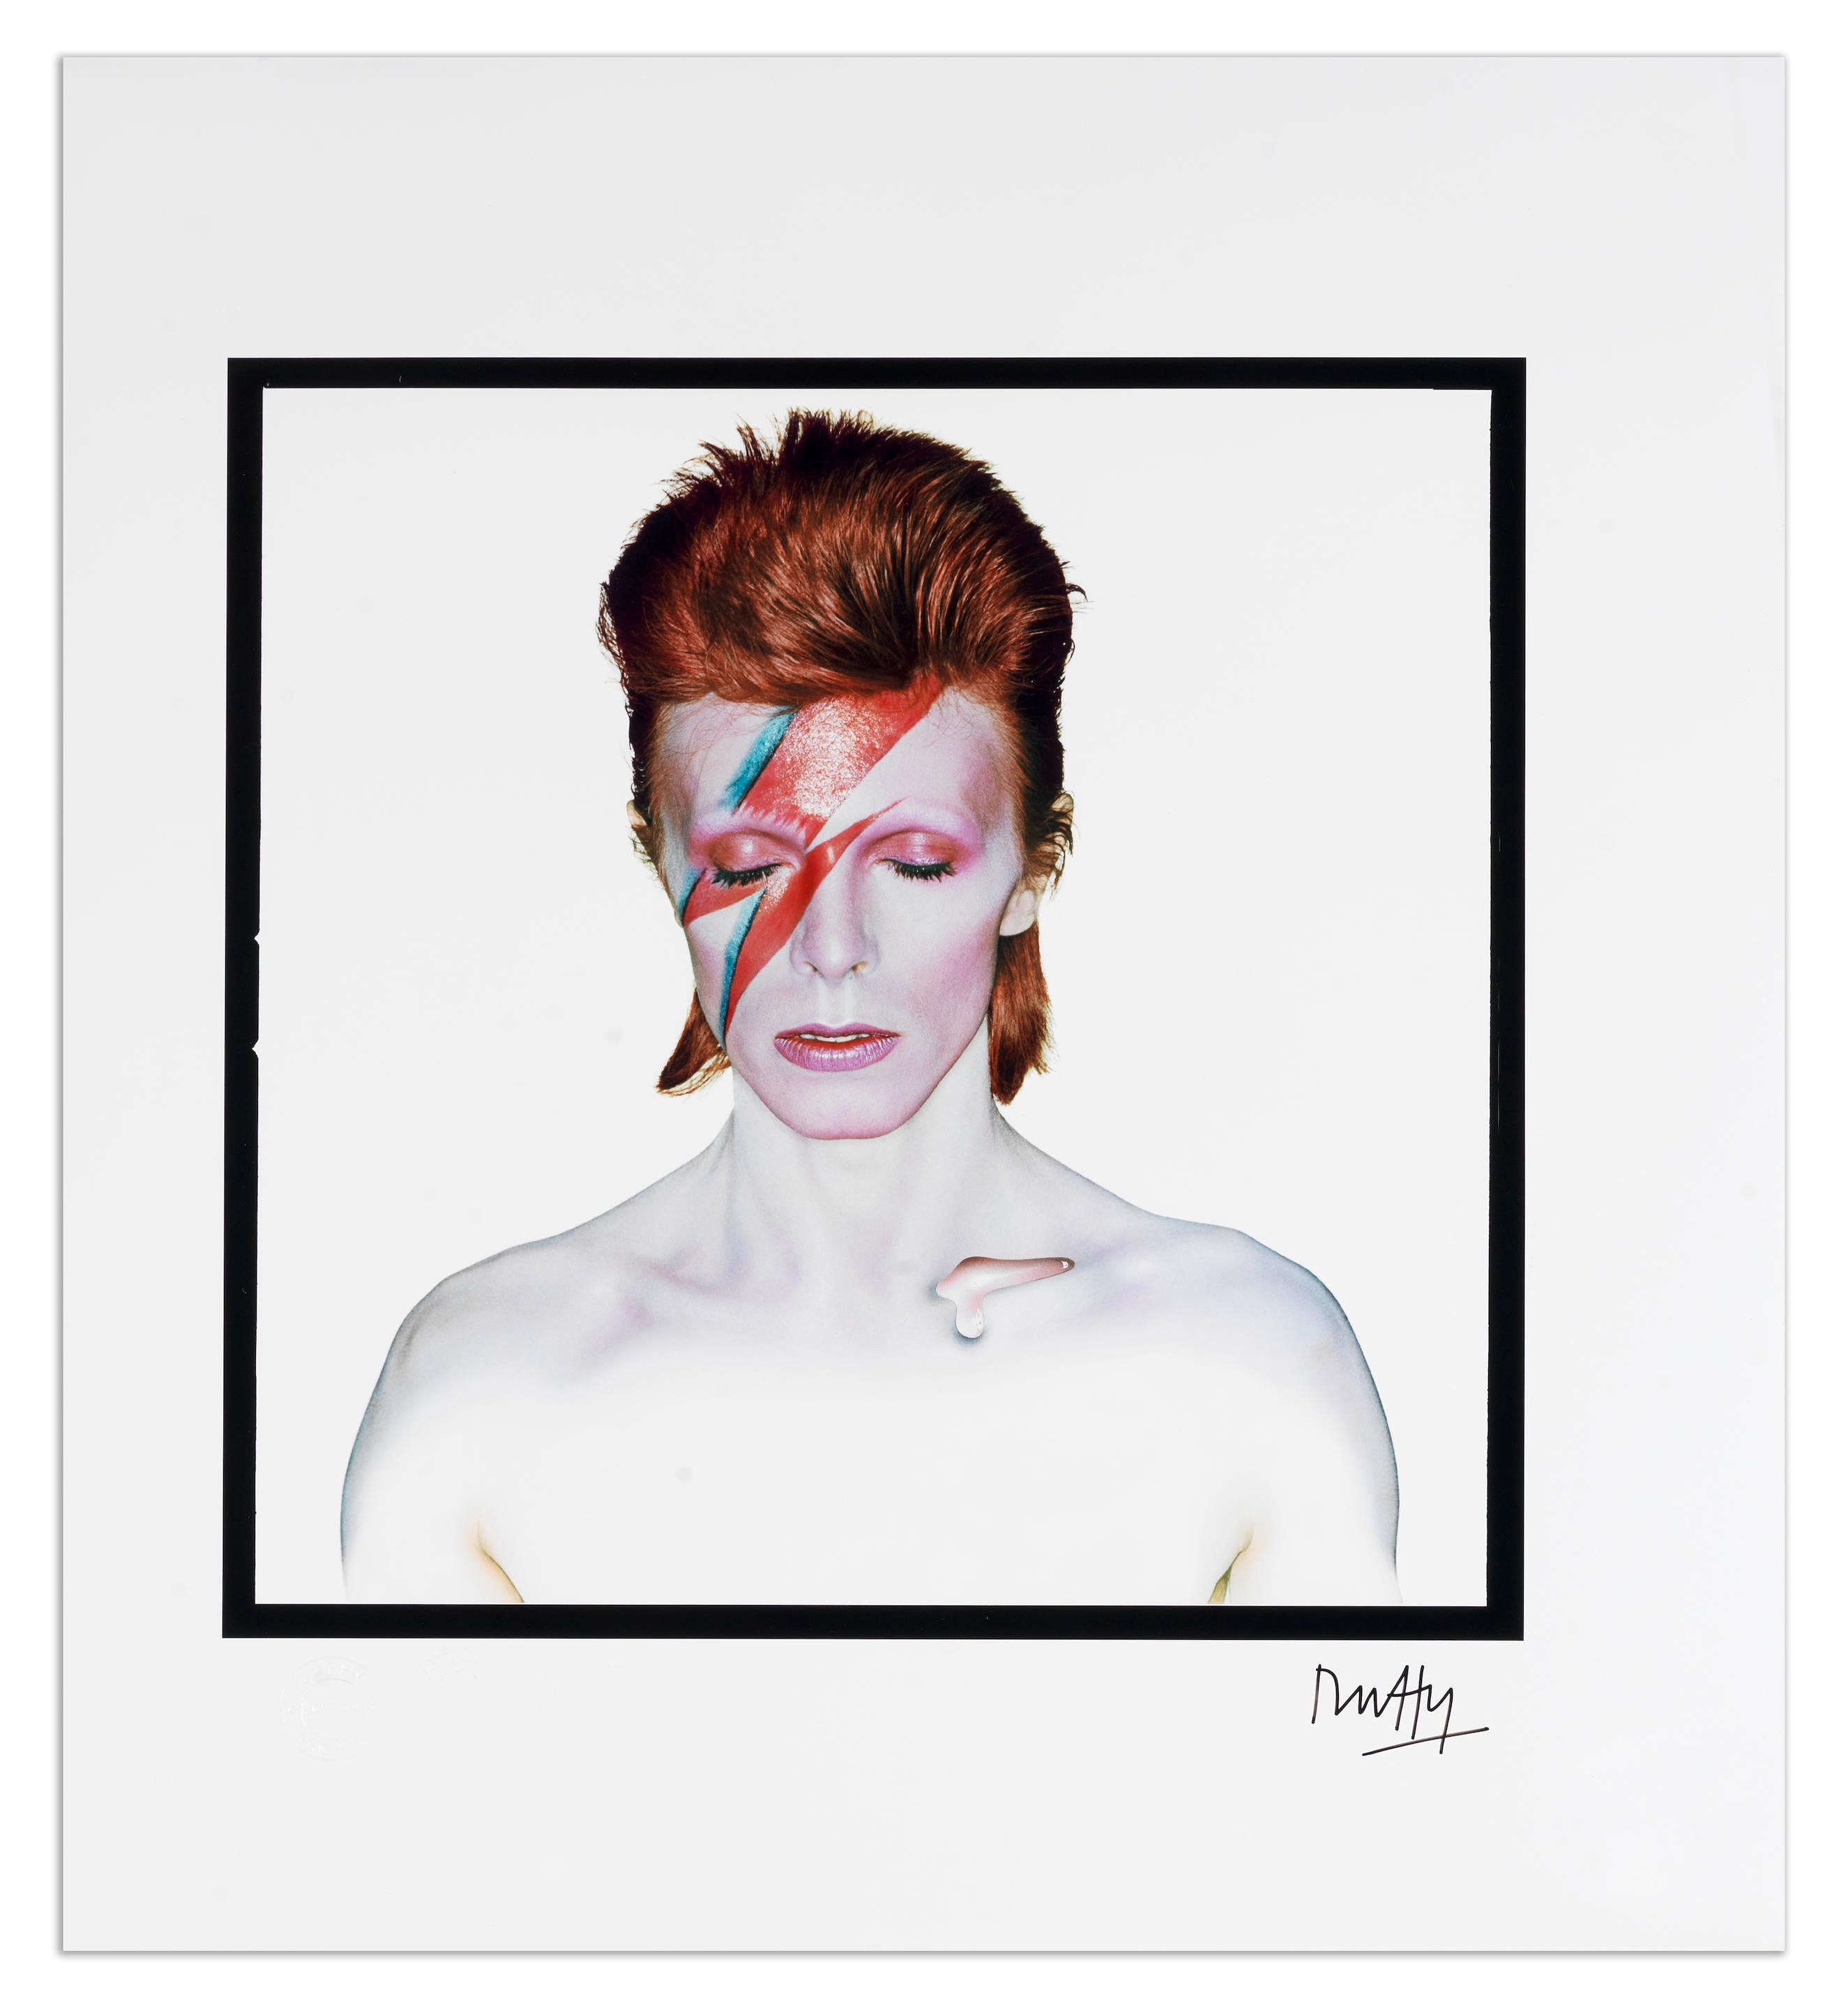 Artwork by Brian Duffy, David Bowie, Aladdin Sane (Eyes Closed), Made of archival pigment print